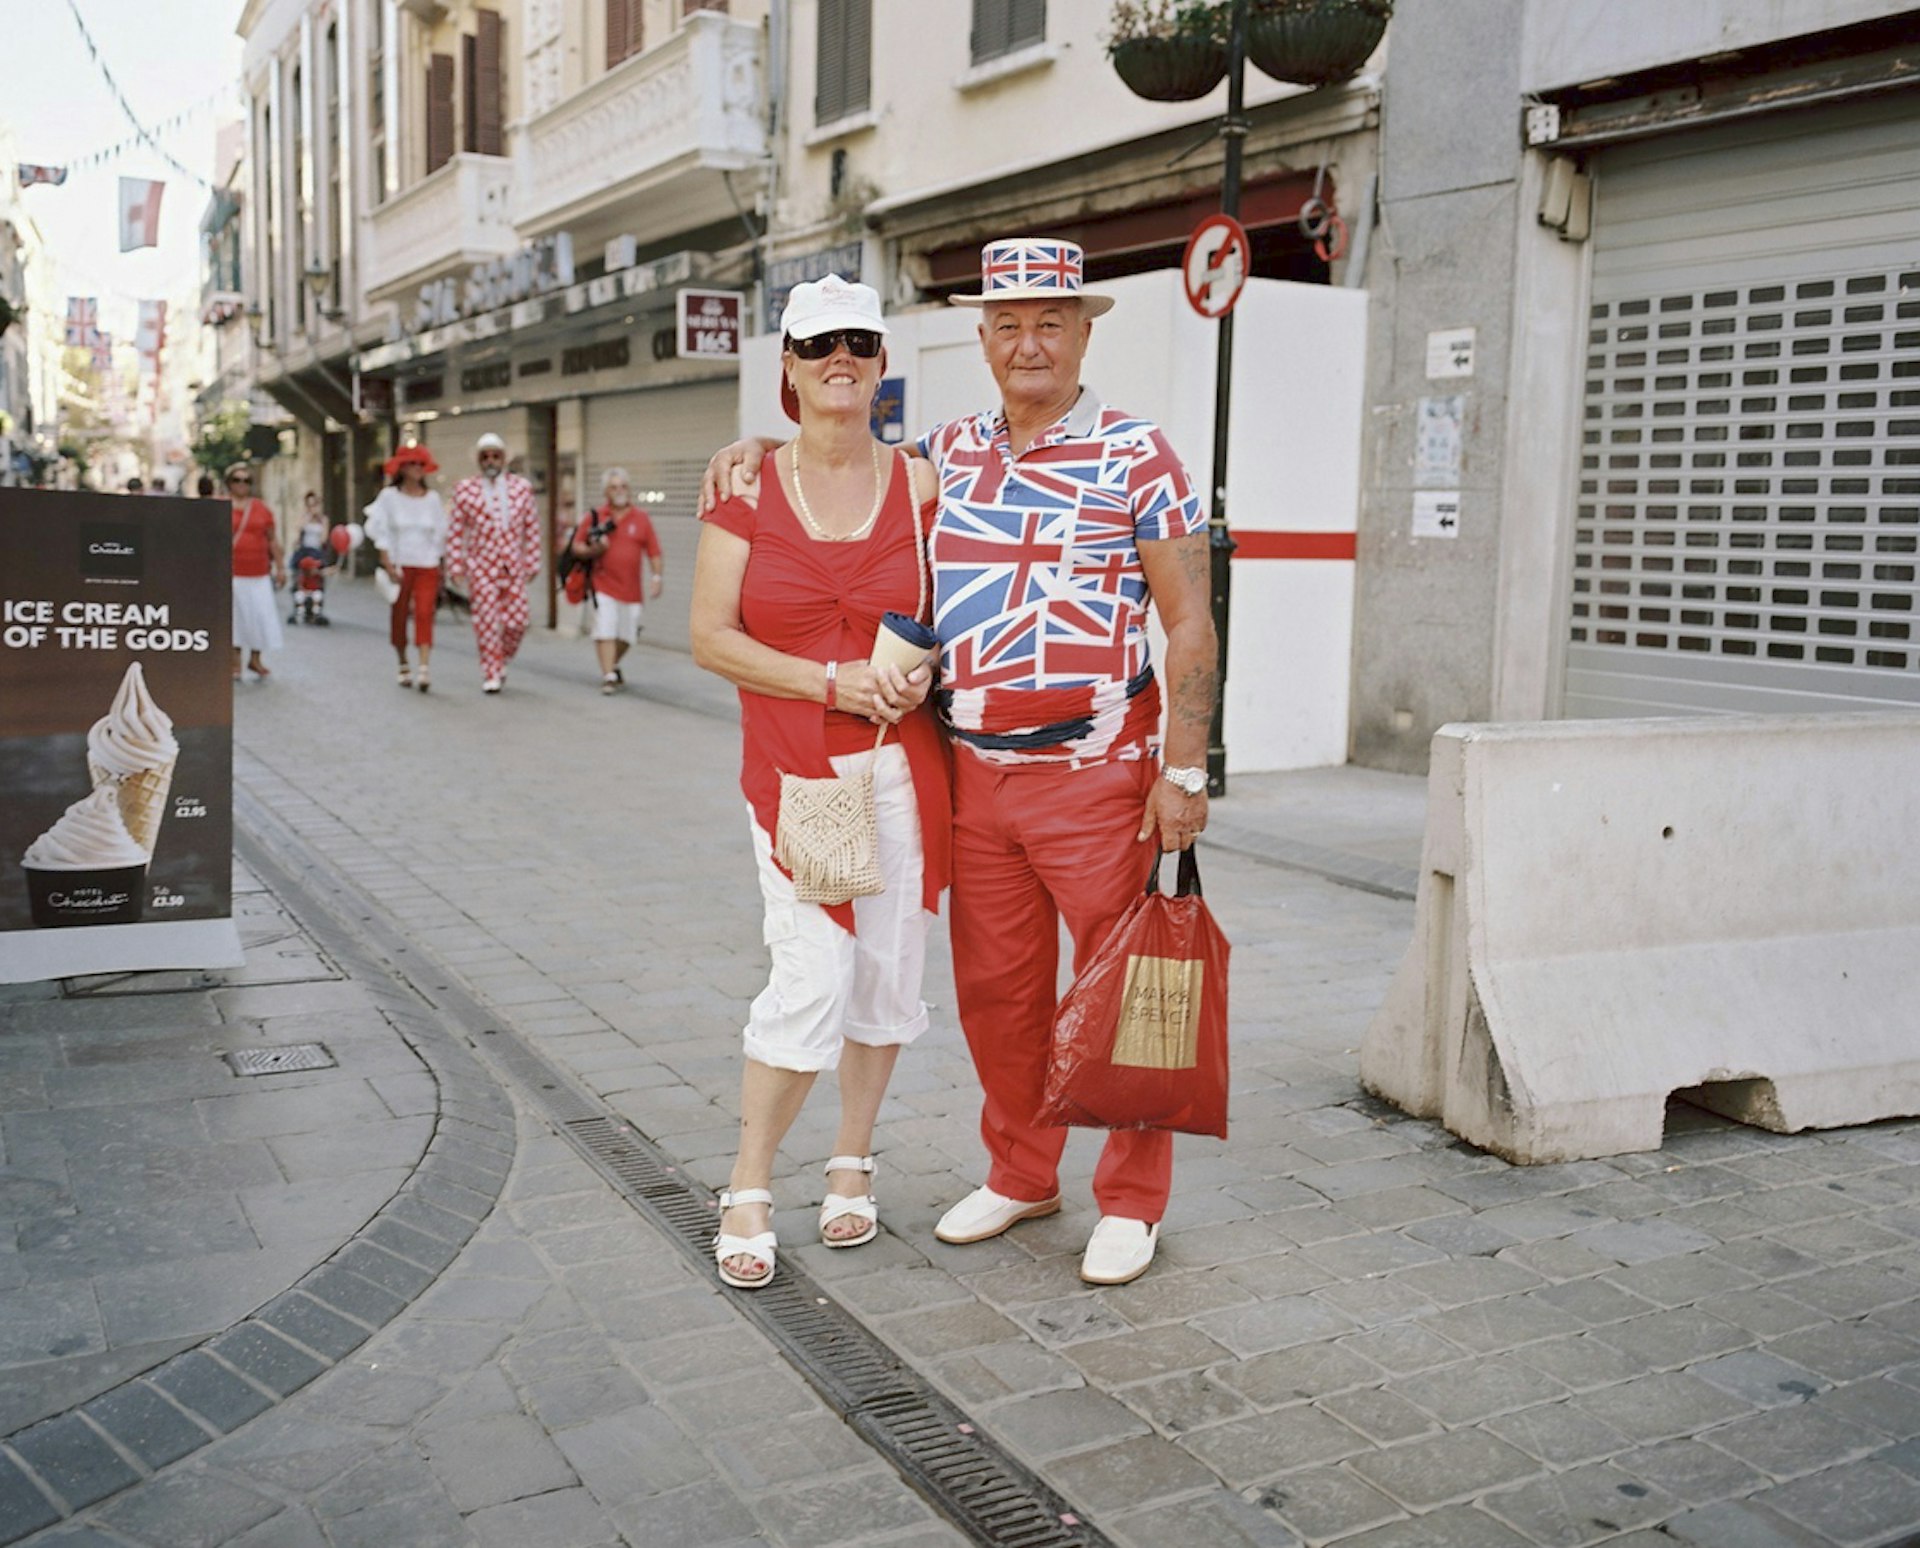 A post-Brexit portrait of life in Gibraltar